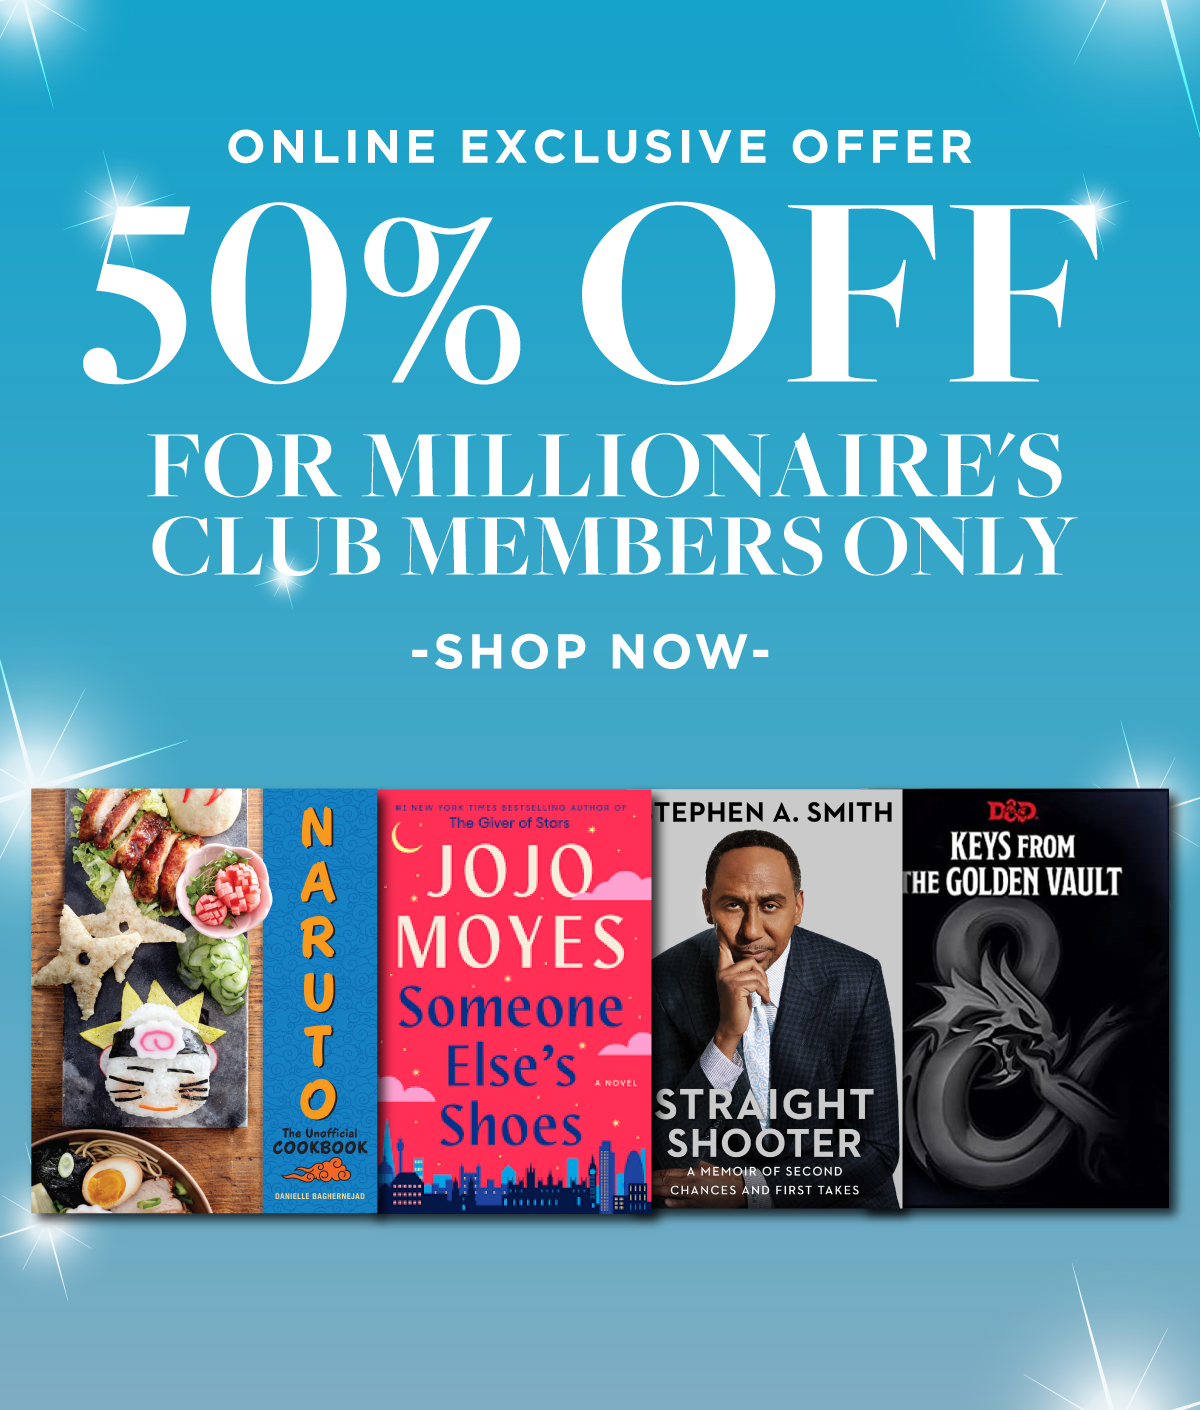 ONLINE EXCLUSIVE OFFER SO% ol FOR MILLIONAIRE'S CLUB MEMBERS ONLY -SHOP NOW- A 